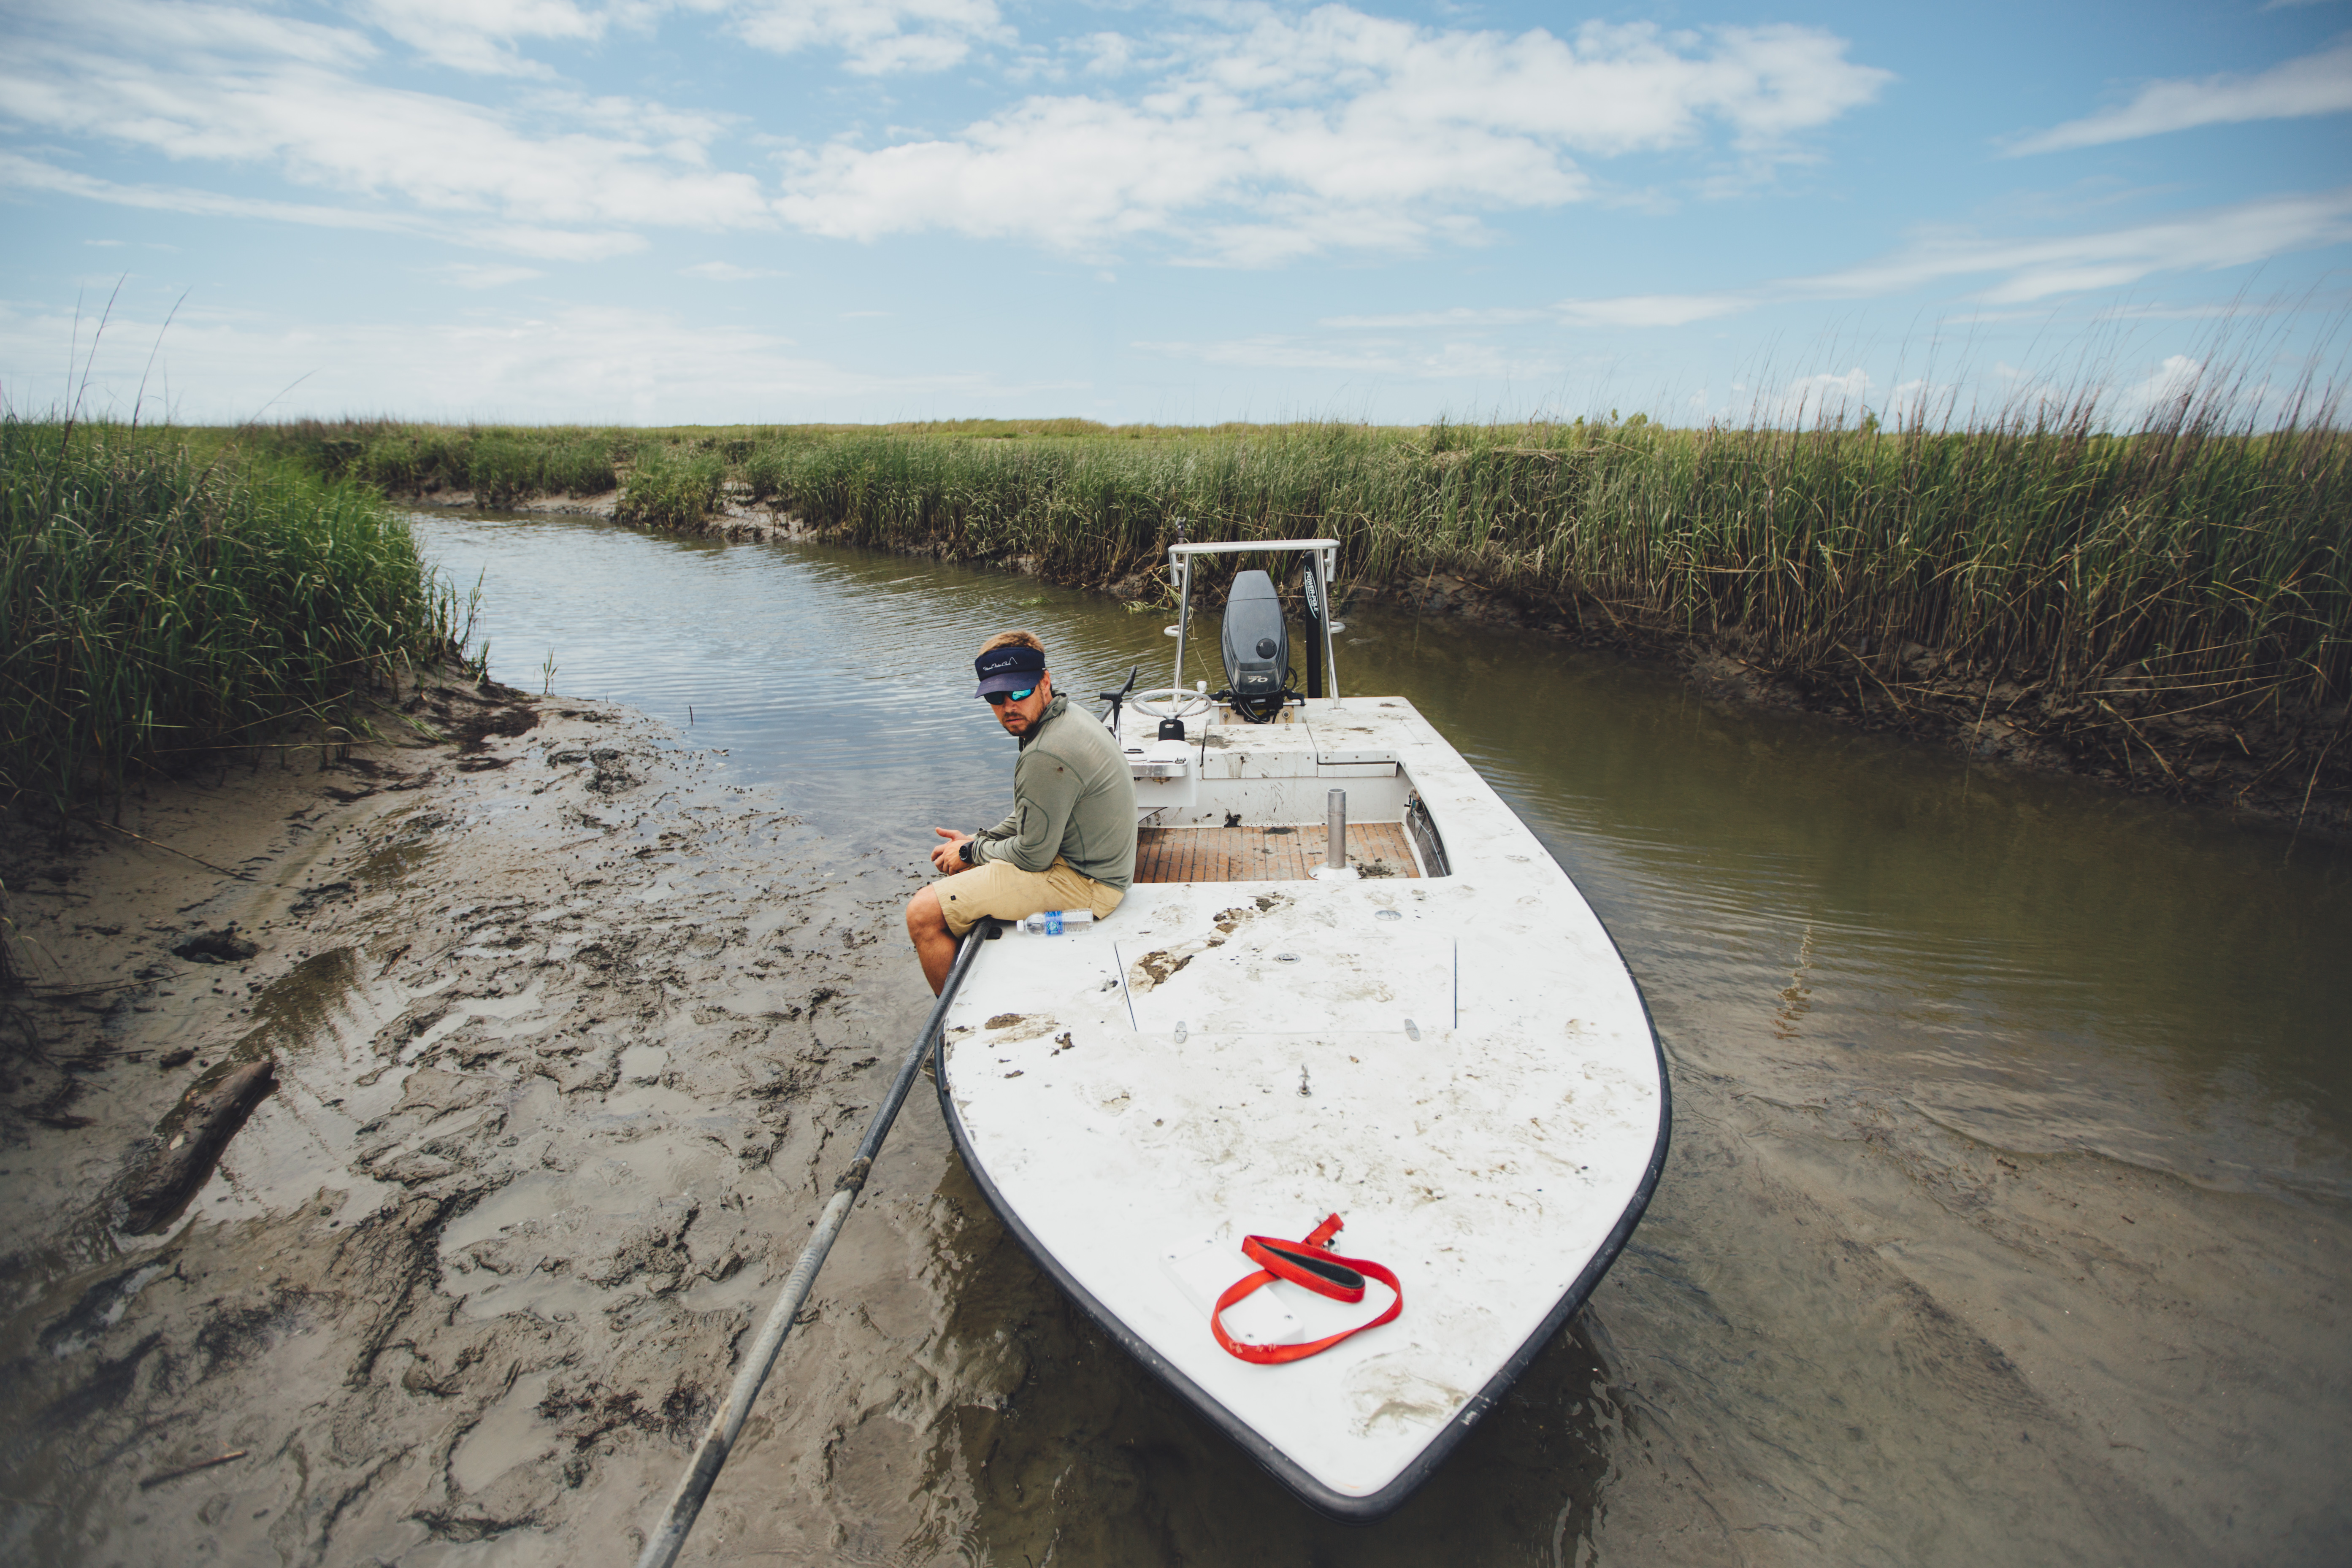 FINALIST Professional category: Lowcountry Lowtide by  Jeremy Clark; “Caught in a small lowcountry creek by the low tide. We may have missed a Friday staff meeting due to this snafu... Taken just north of Isle of Palms on May 29, 2015.”